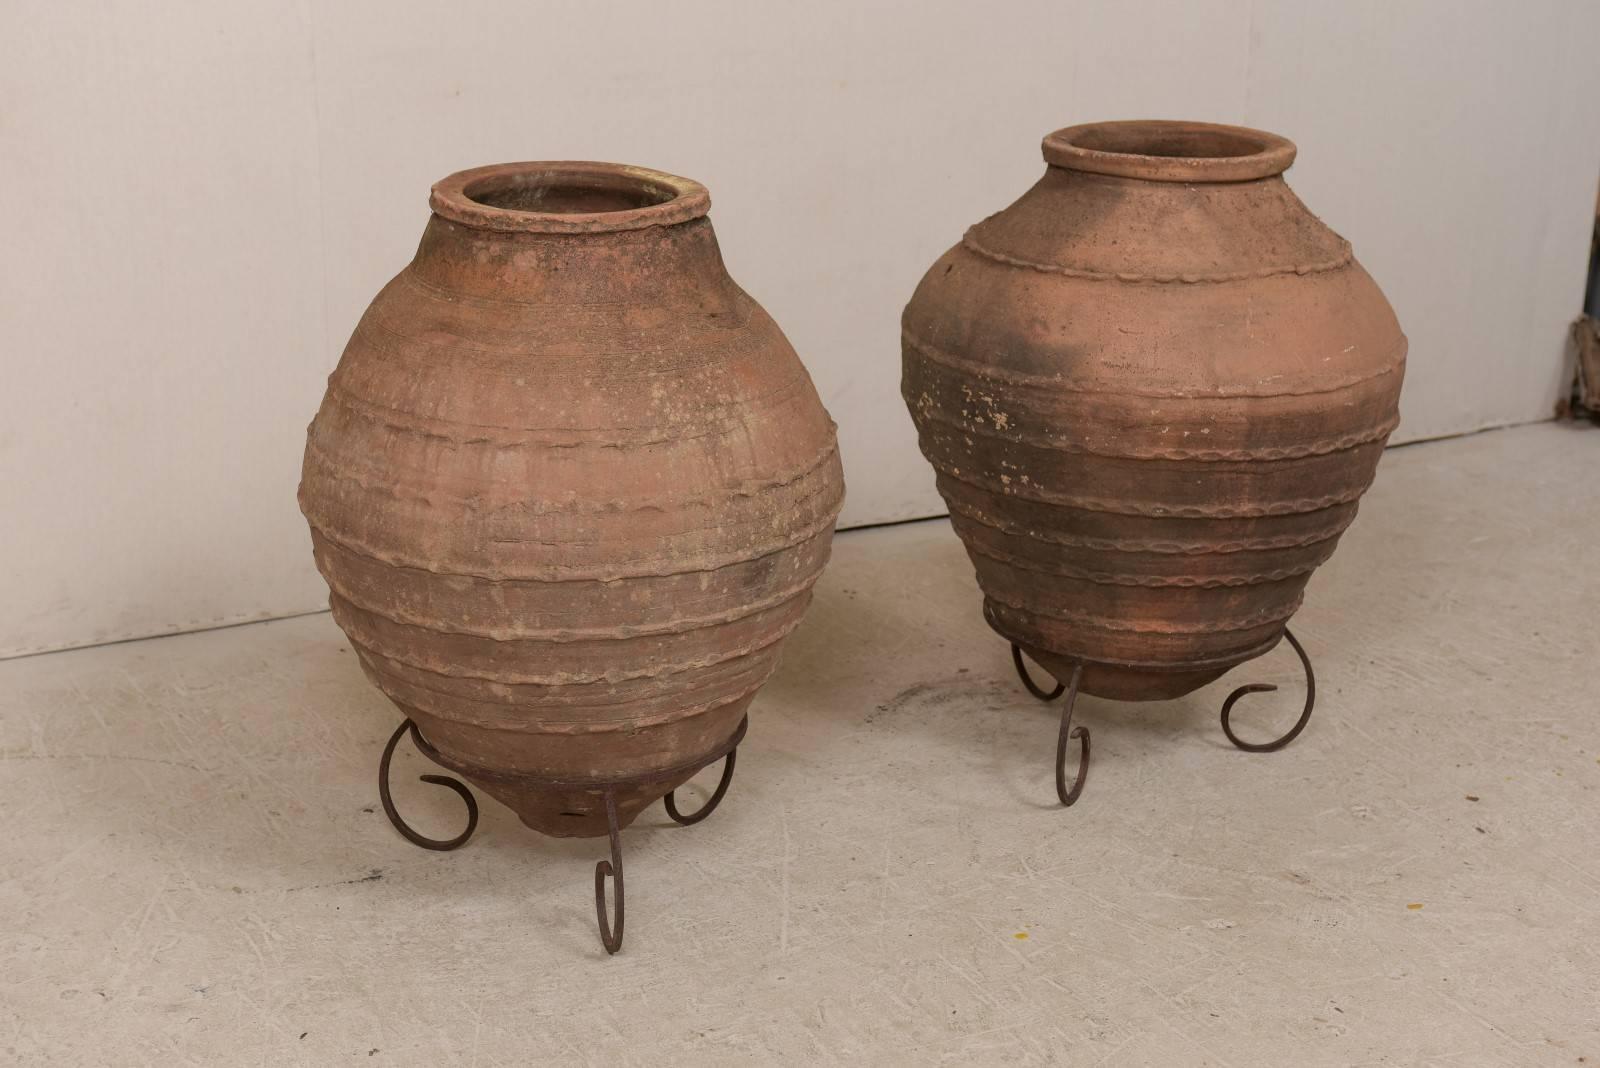 Spanish Colonial Pair of Antique Turkish Olive Jars Made of Terracotta on Scrolled Metal Stands